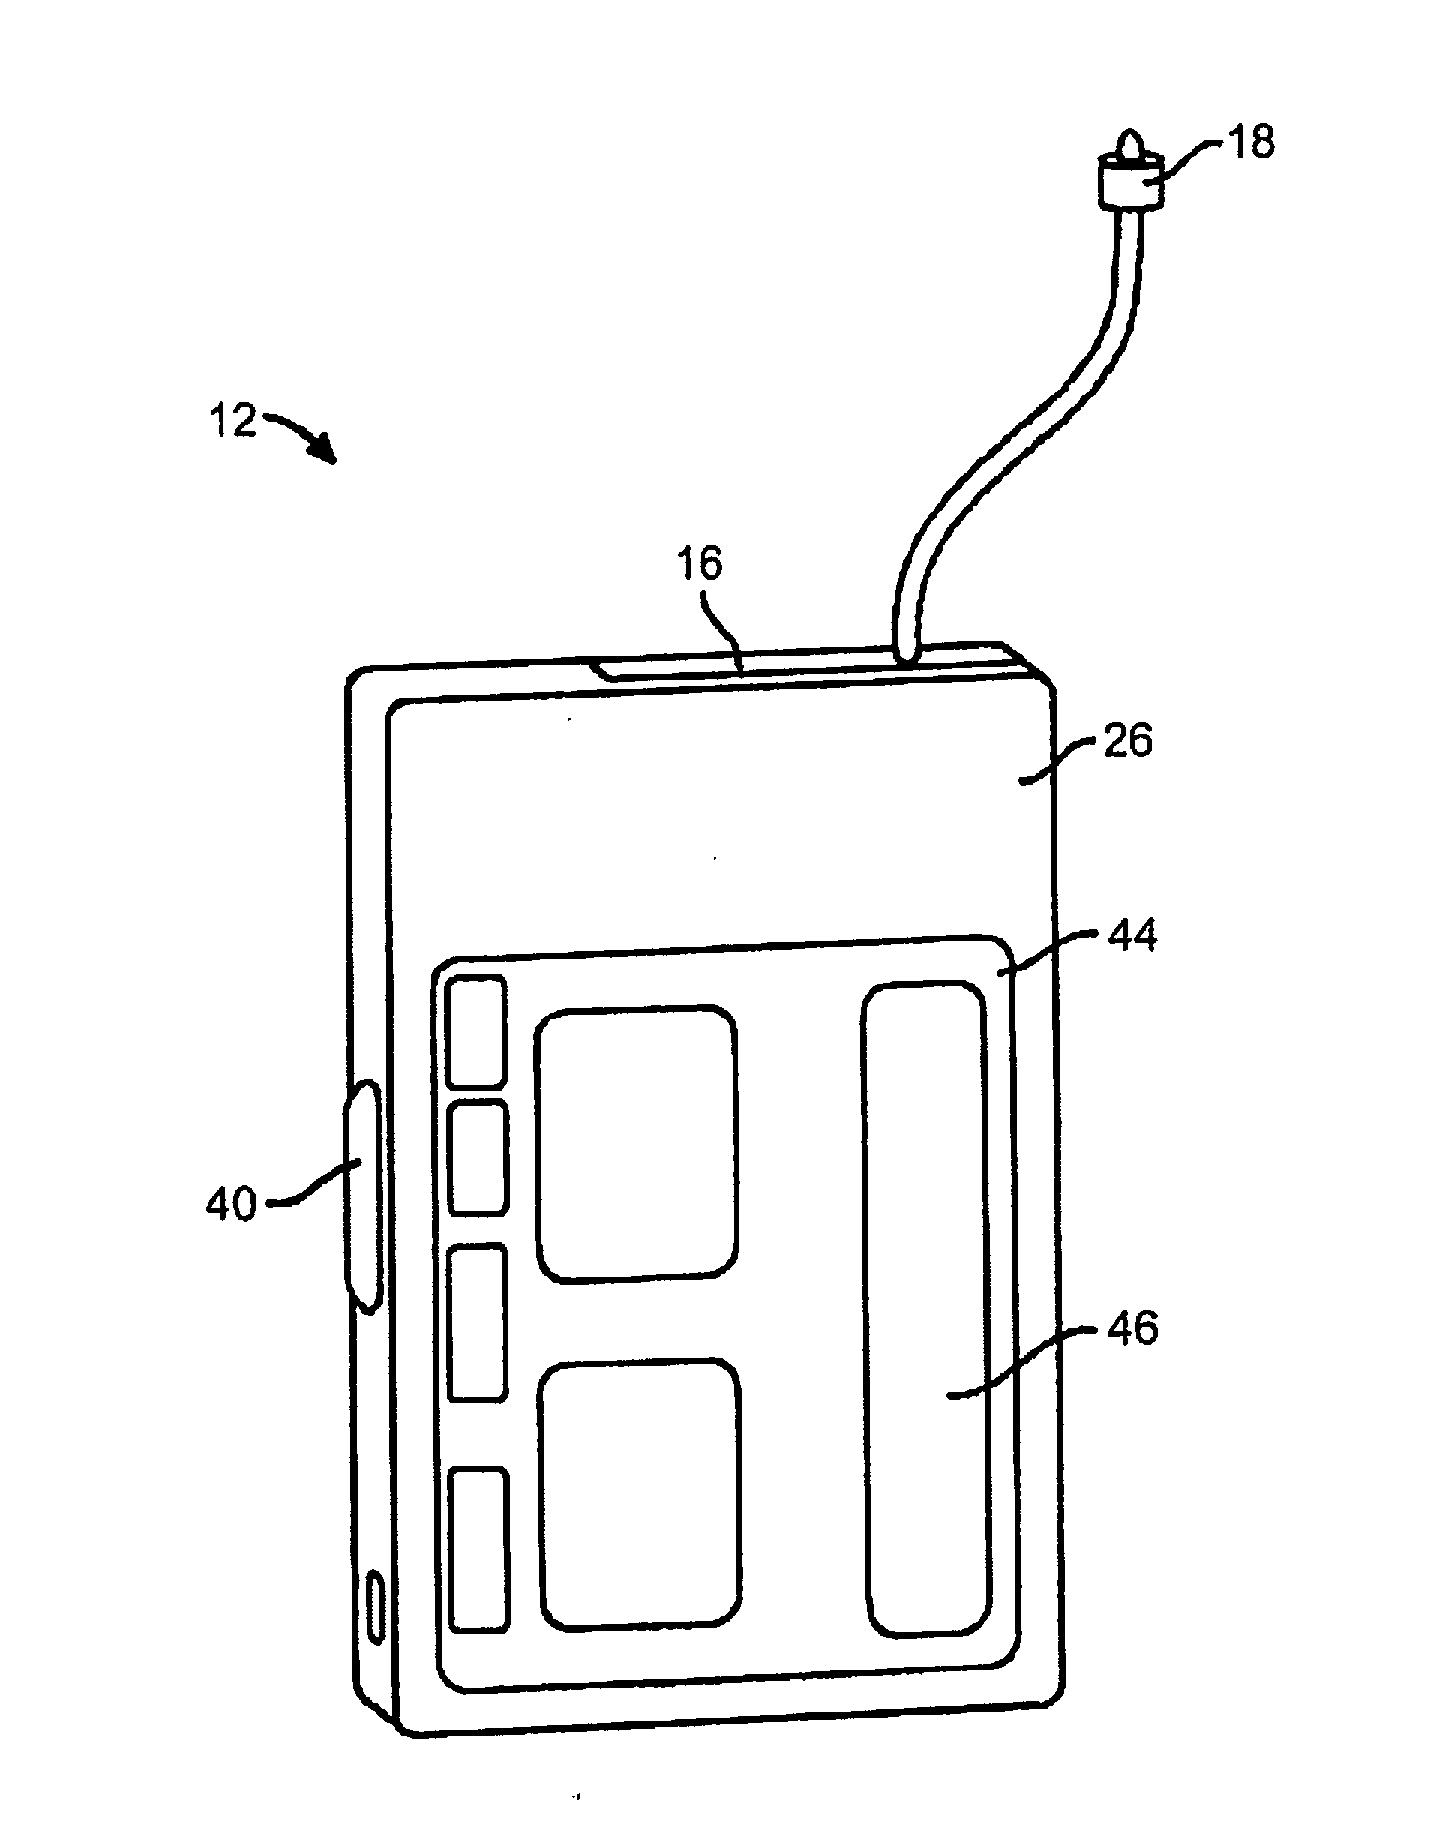 System and method for modifying medicament delivery parameters after a site change